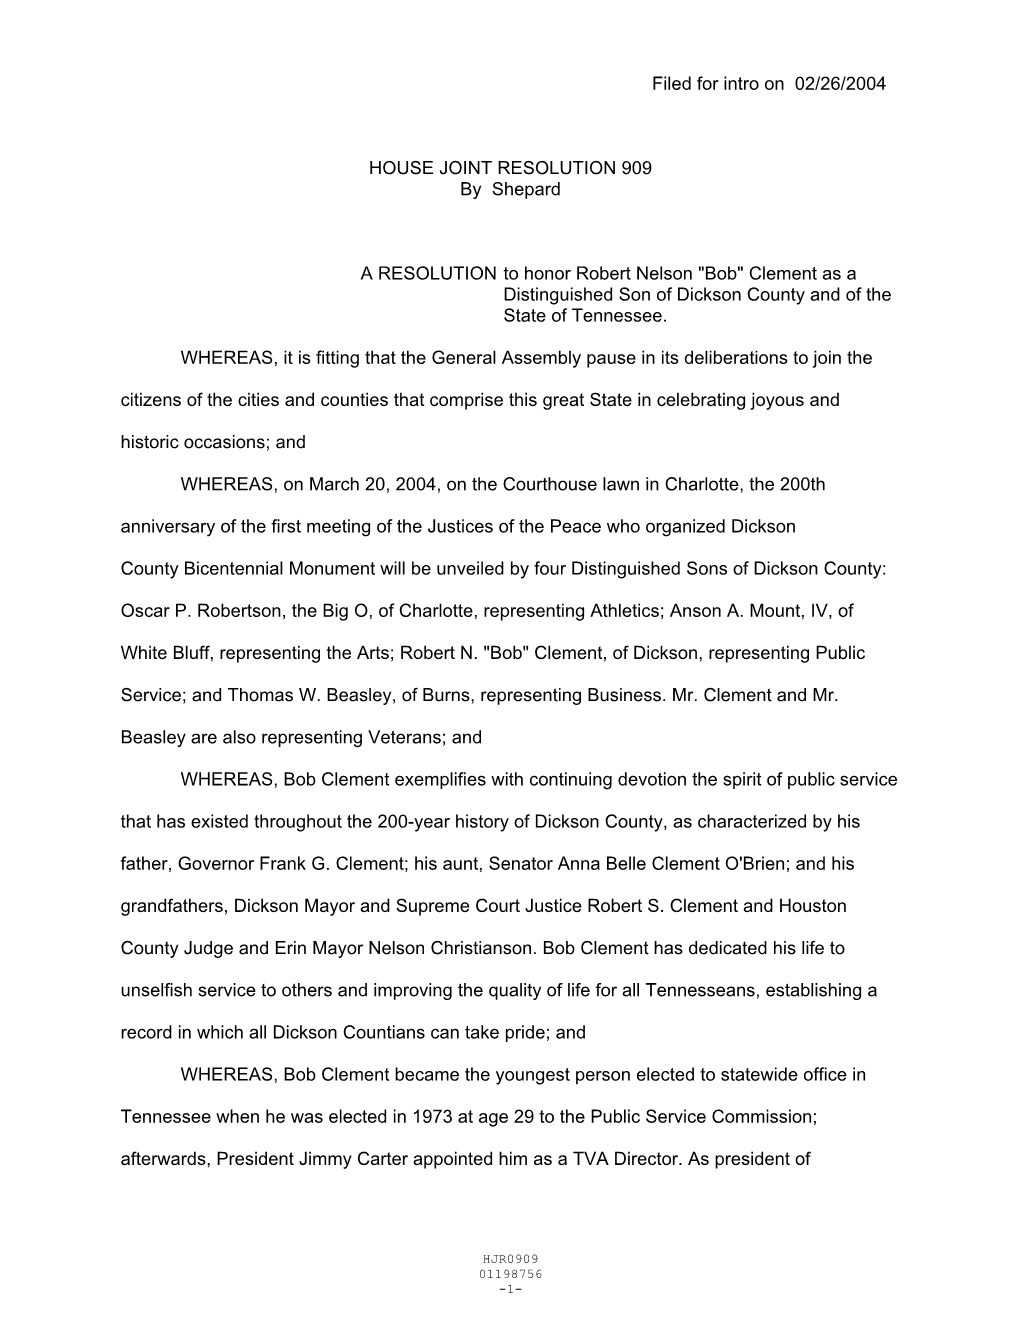 Filed for Intro on 02/26/2004 HOUSE JOINT RESOLUTION 909 By